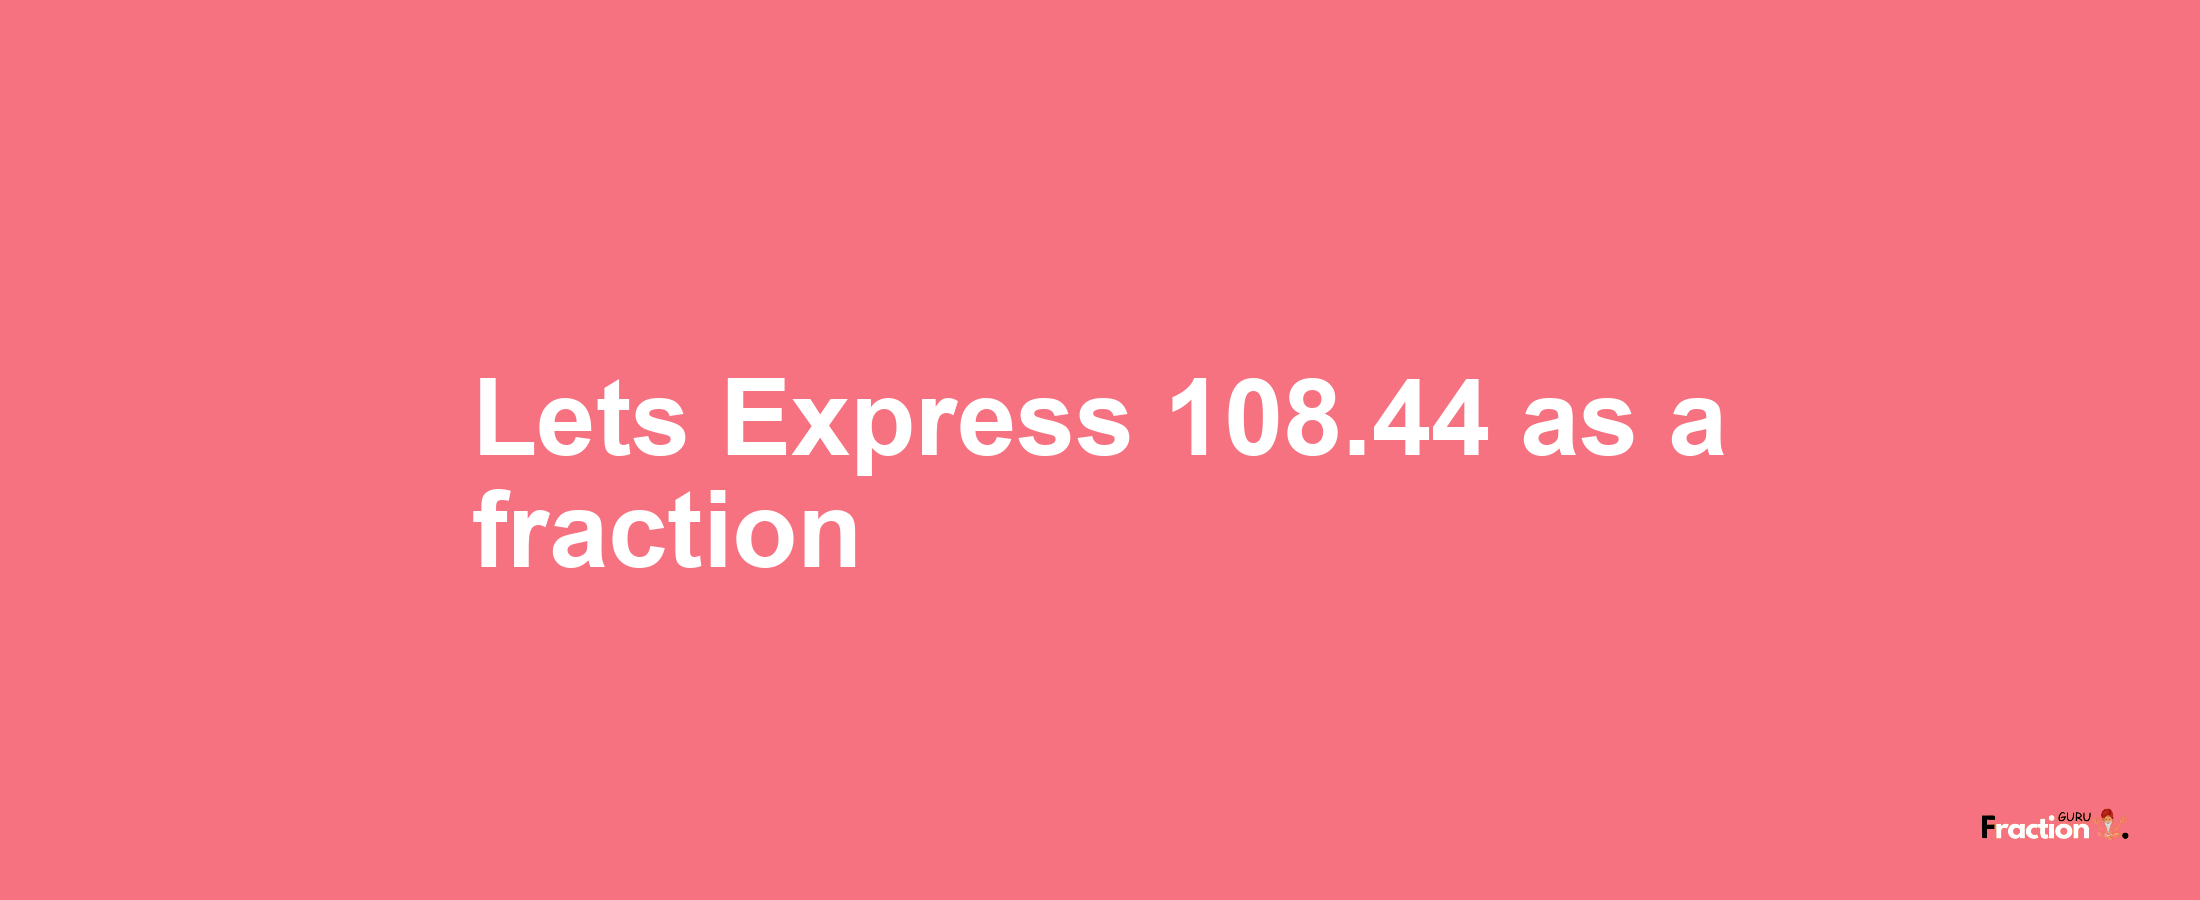 Lets Express 108.44 as afraction